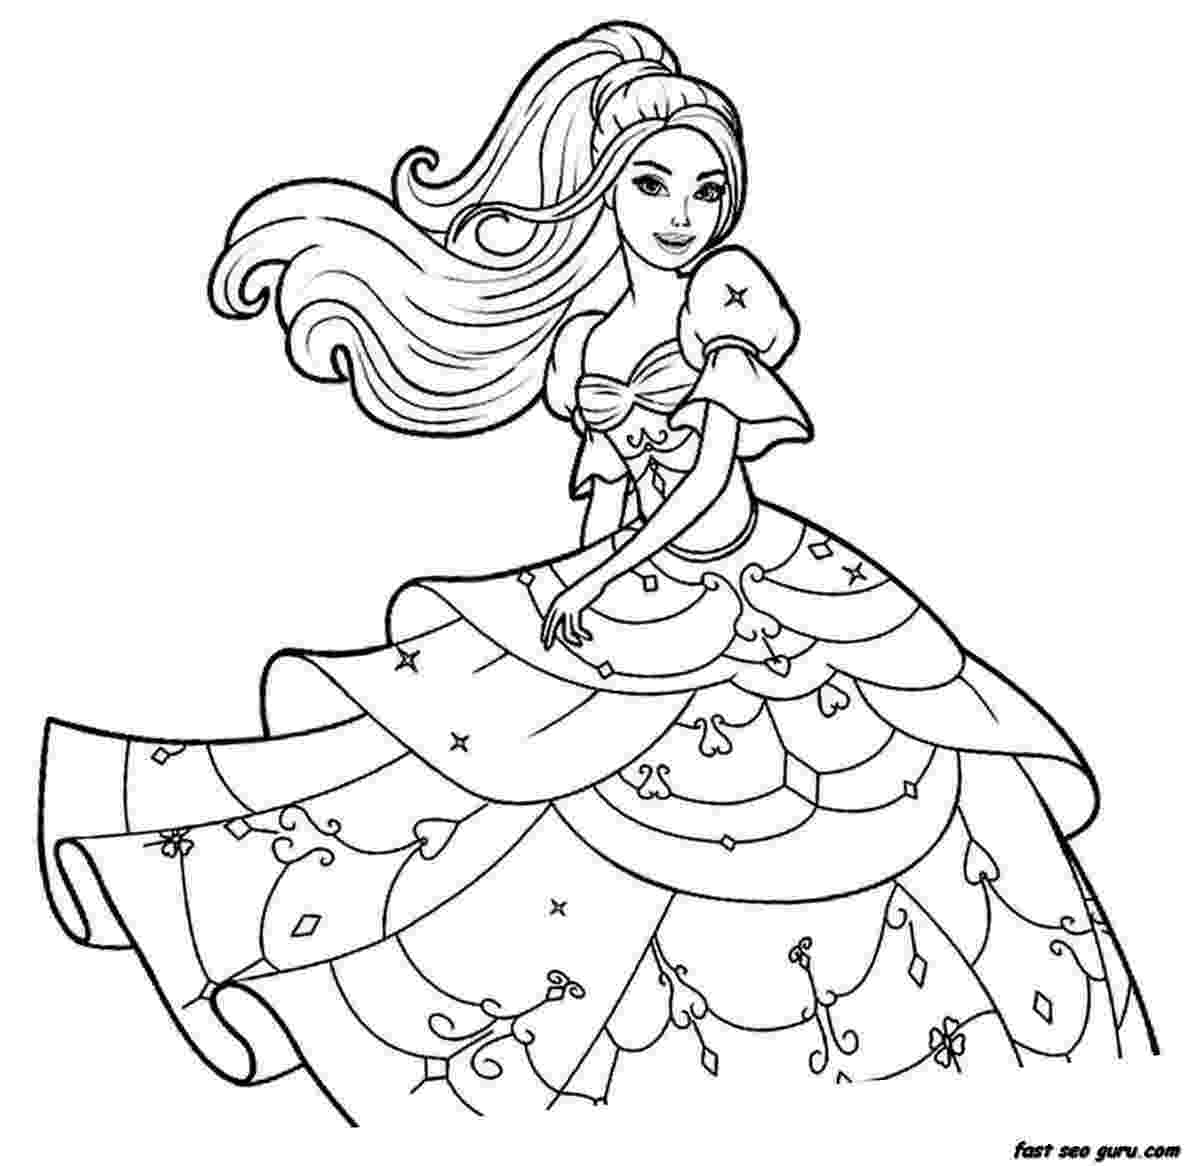 girl colouring pages new moxie girlz coloring pages will be added frequently so pages girl colouring 